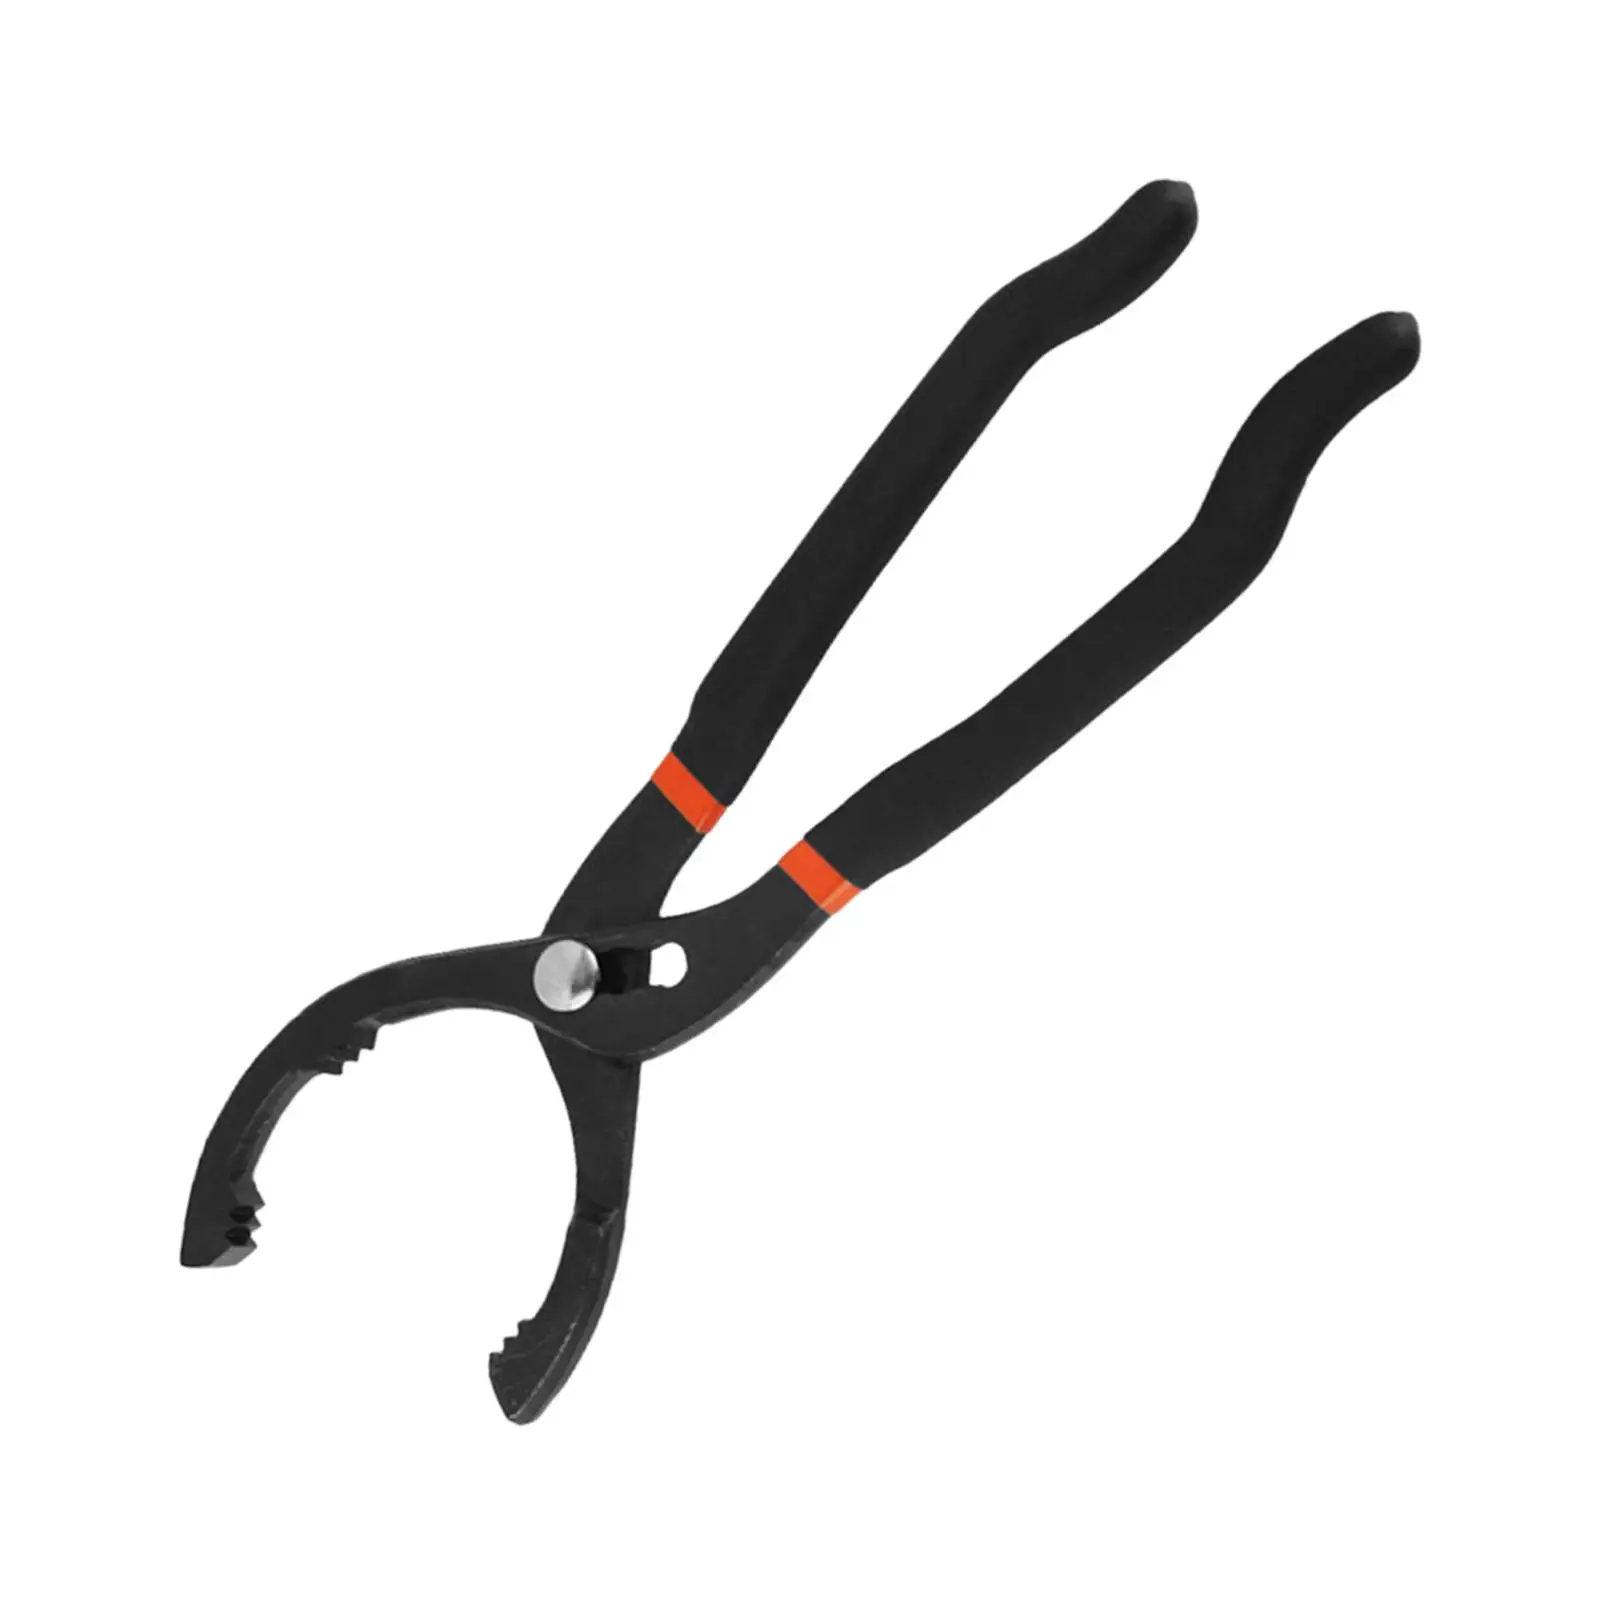 12 inch Filter Wrench Pliers Repair Tool Convenient Universal Sturdy Durable Useful Hand Removal Plier Oil Filter Wrench